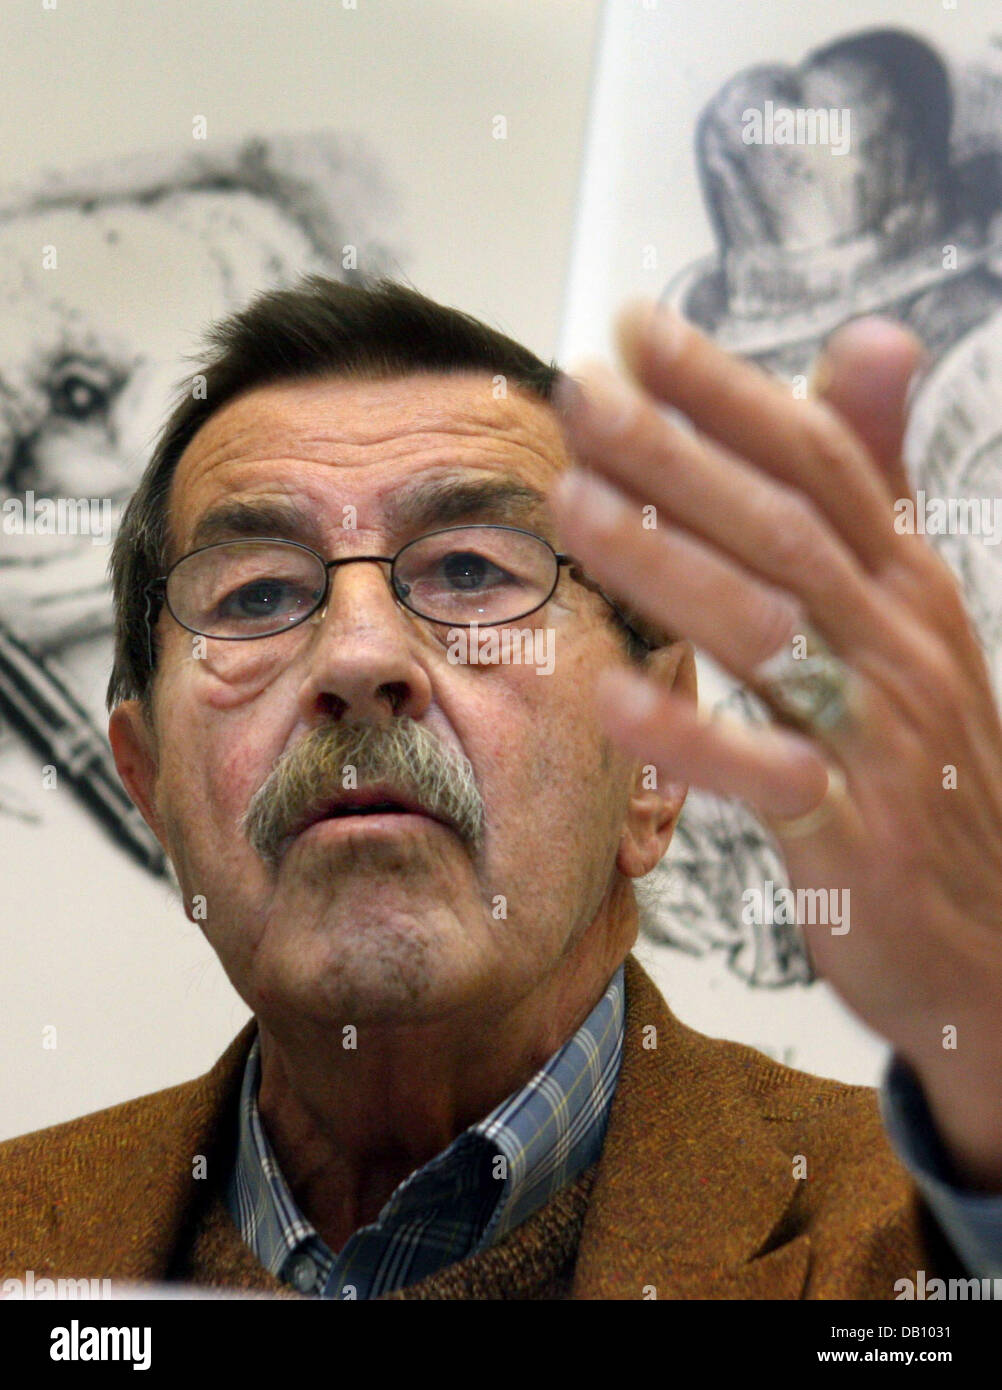 Nobel Prize-winning German author Guenter Grass, sitting in front of his drawings, speaks during a press conference held in association with publishing house Steidl at Frankfurt Book Fair in Frankfurt Main, Germany, 12 October 2007. Grass, who will celebrate his 80th birthday on 16 October 2007, presented the complete edition of his works at the world's largest trade fair for books Stock Photo